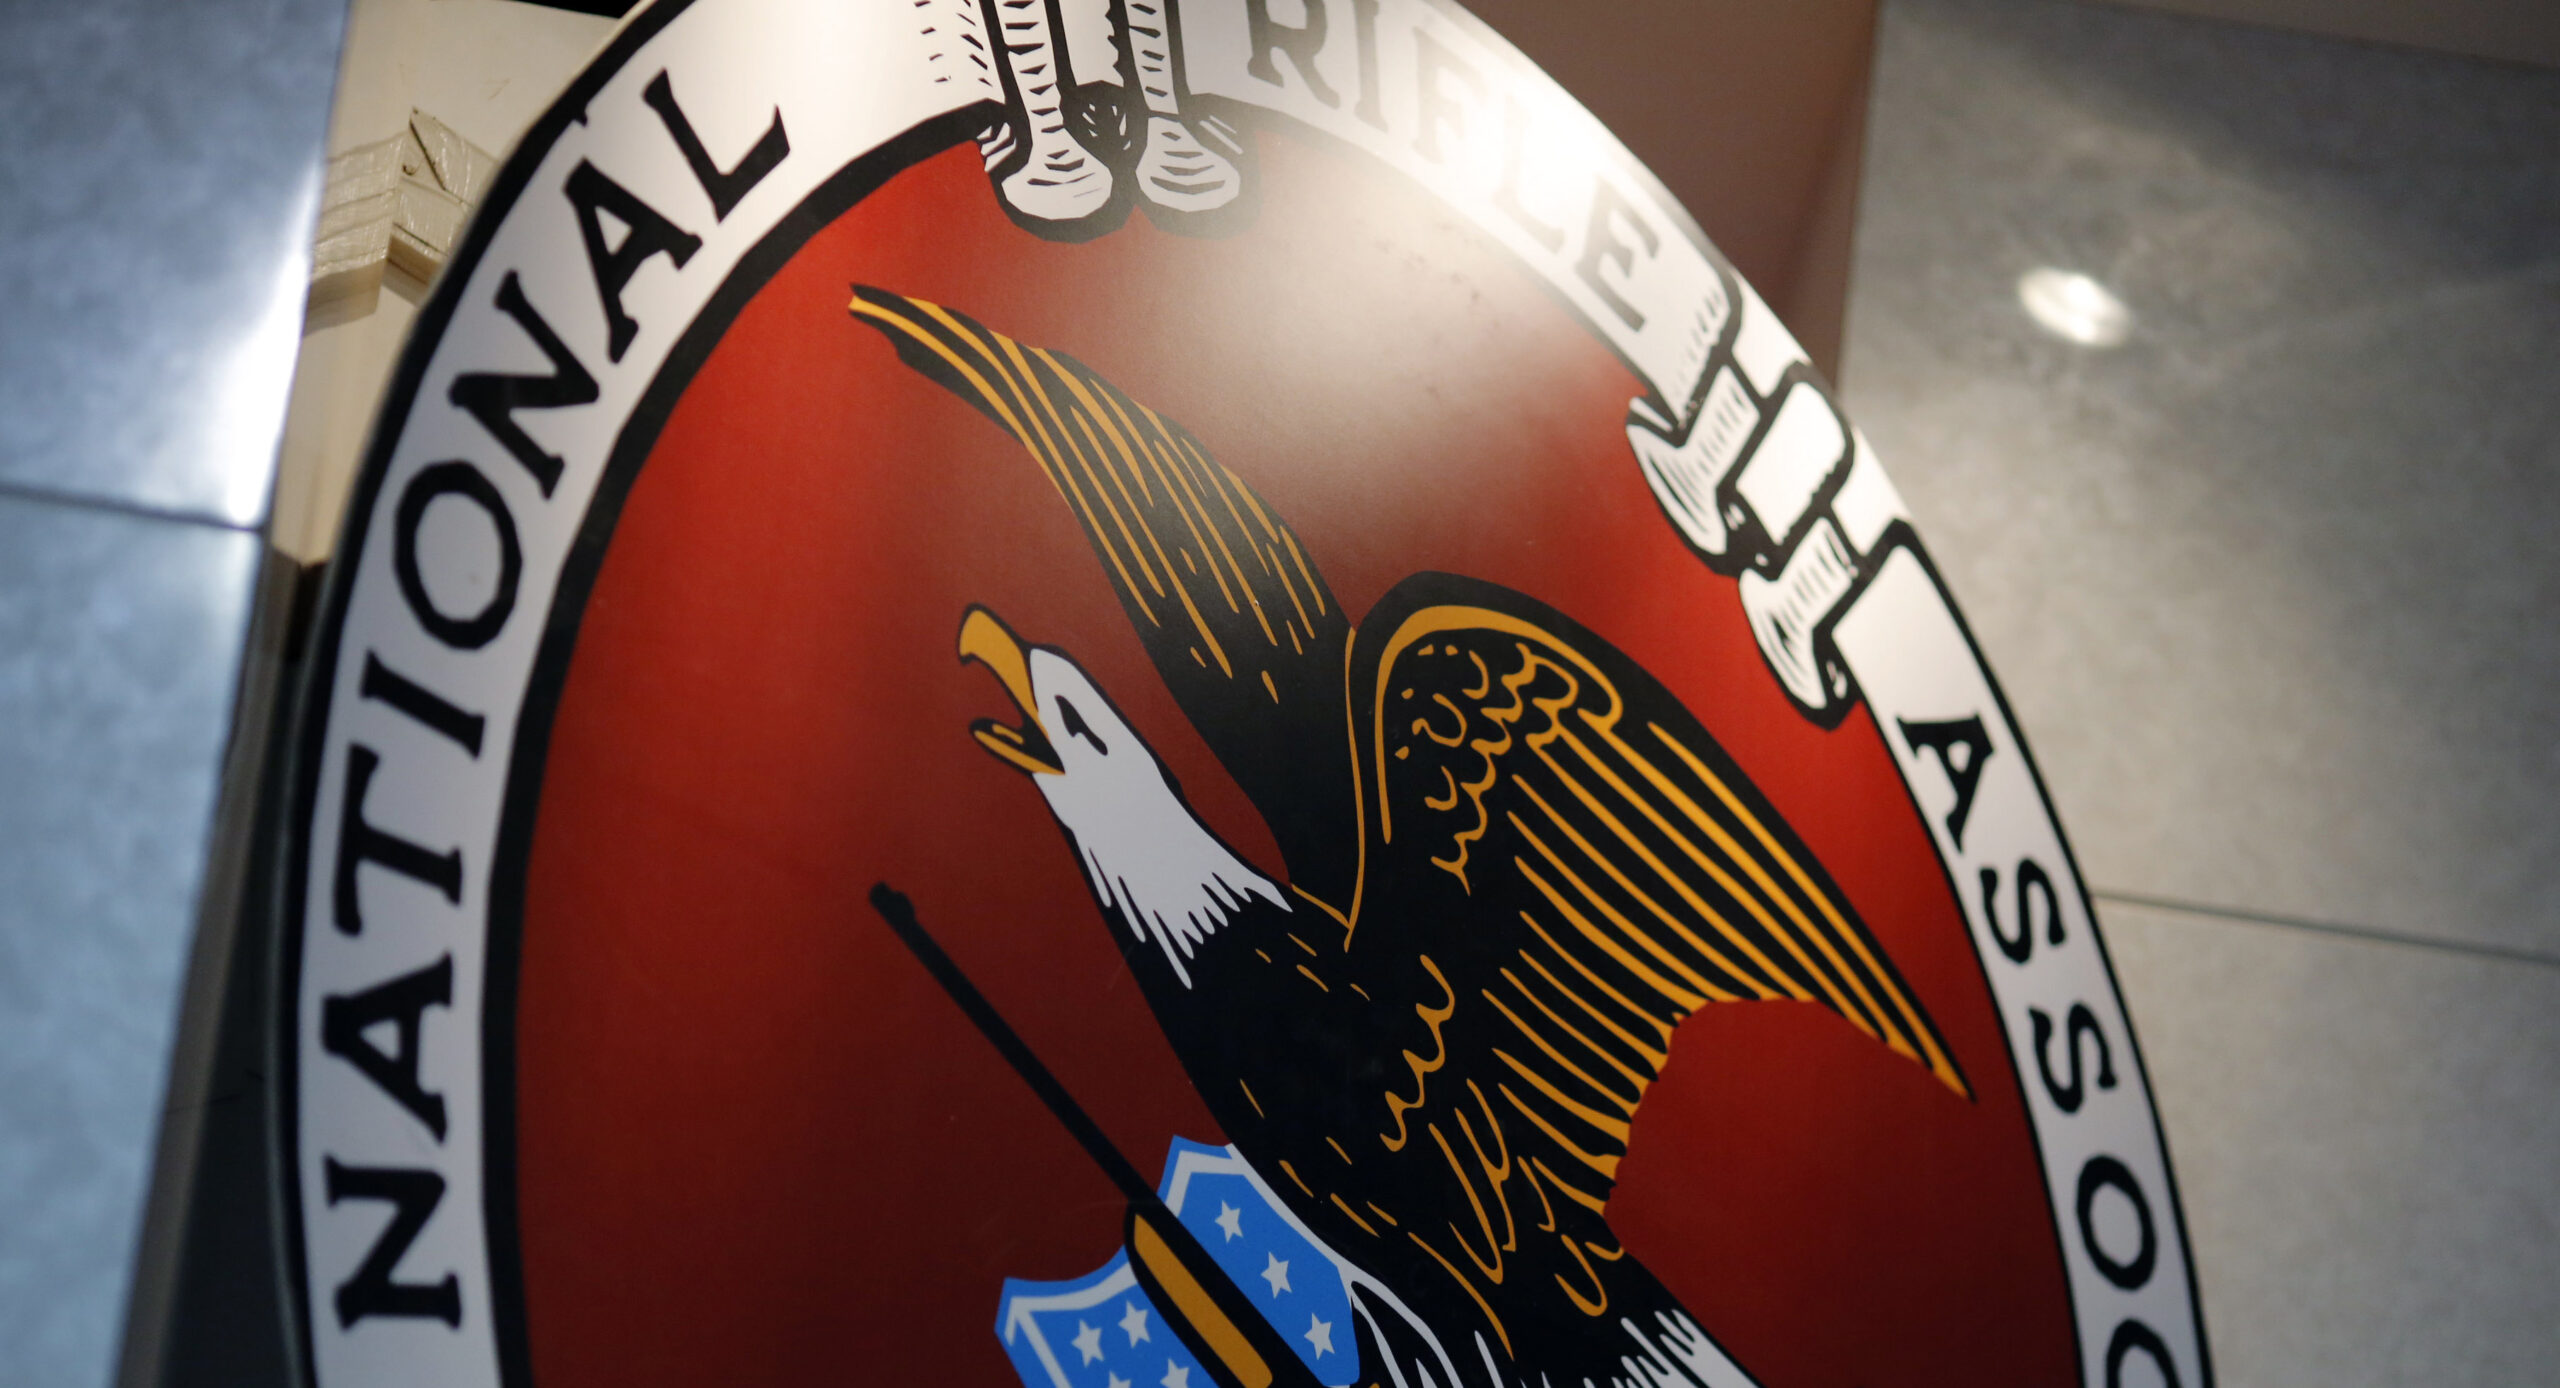 NRA’s Bankruptcy Case Dismissal Applauded by Gun Safety Advocates in Pennsylvania